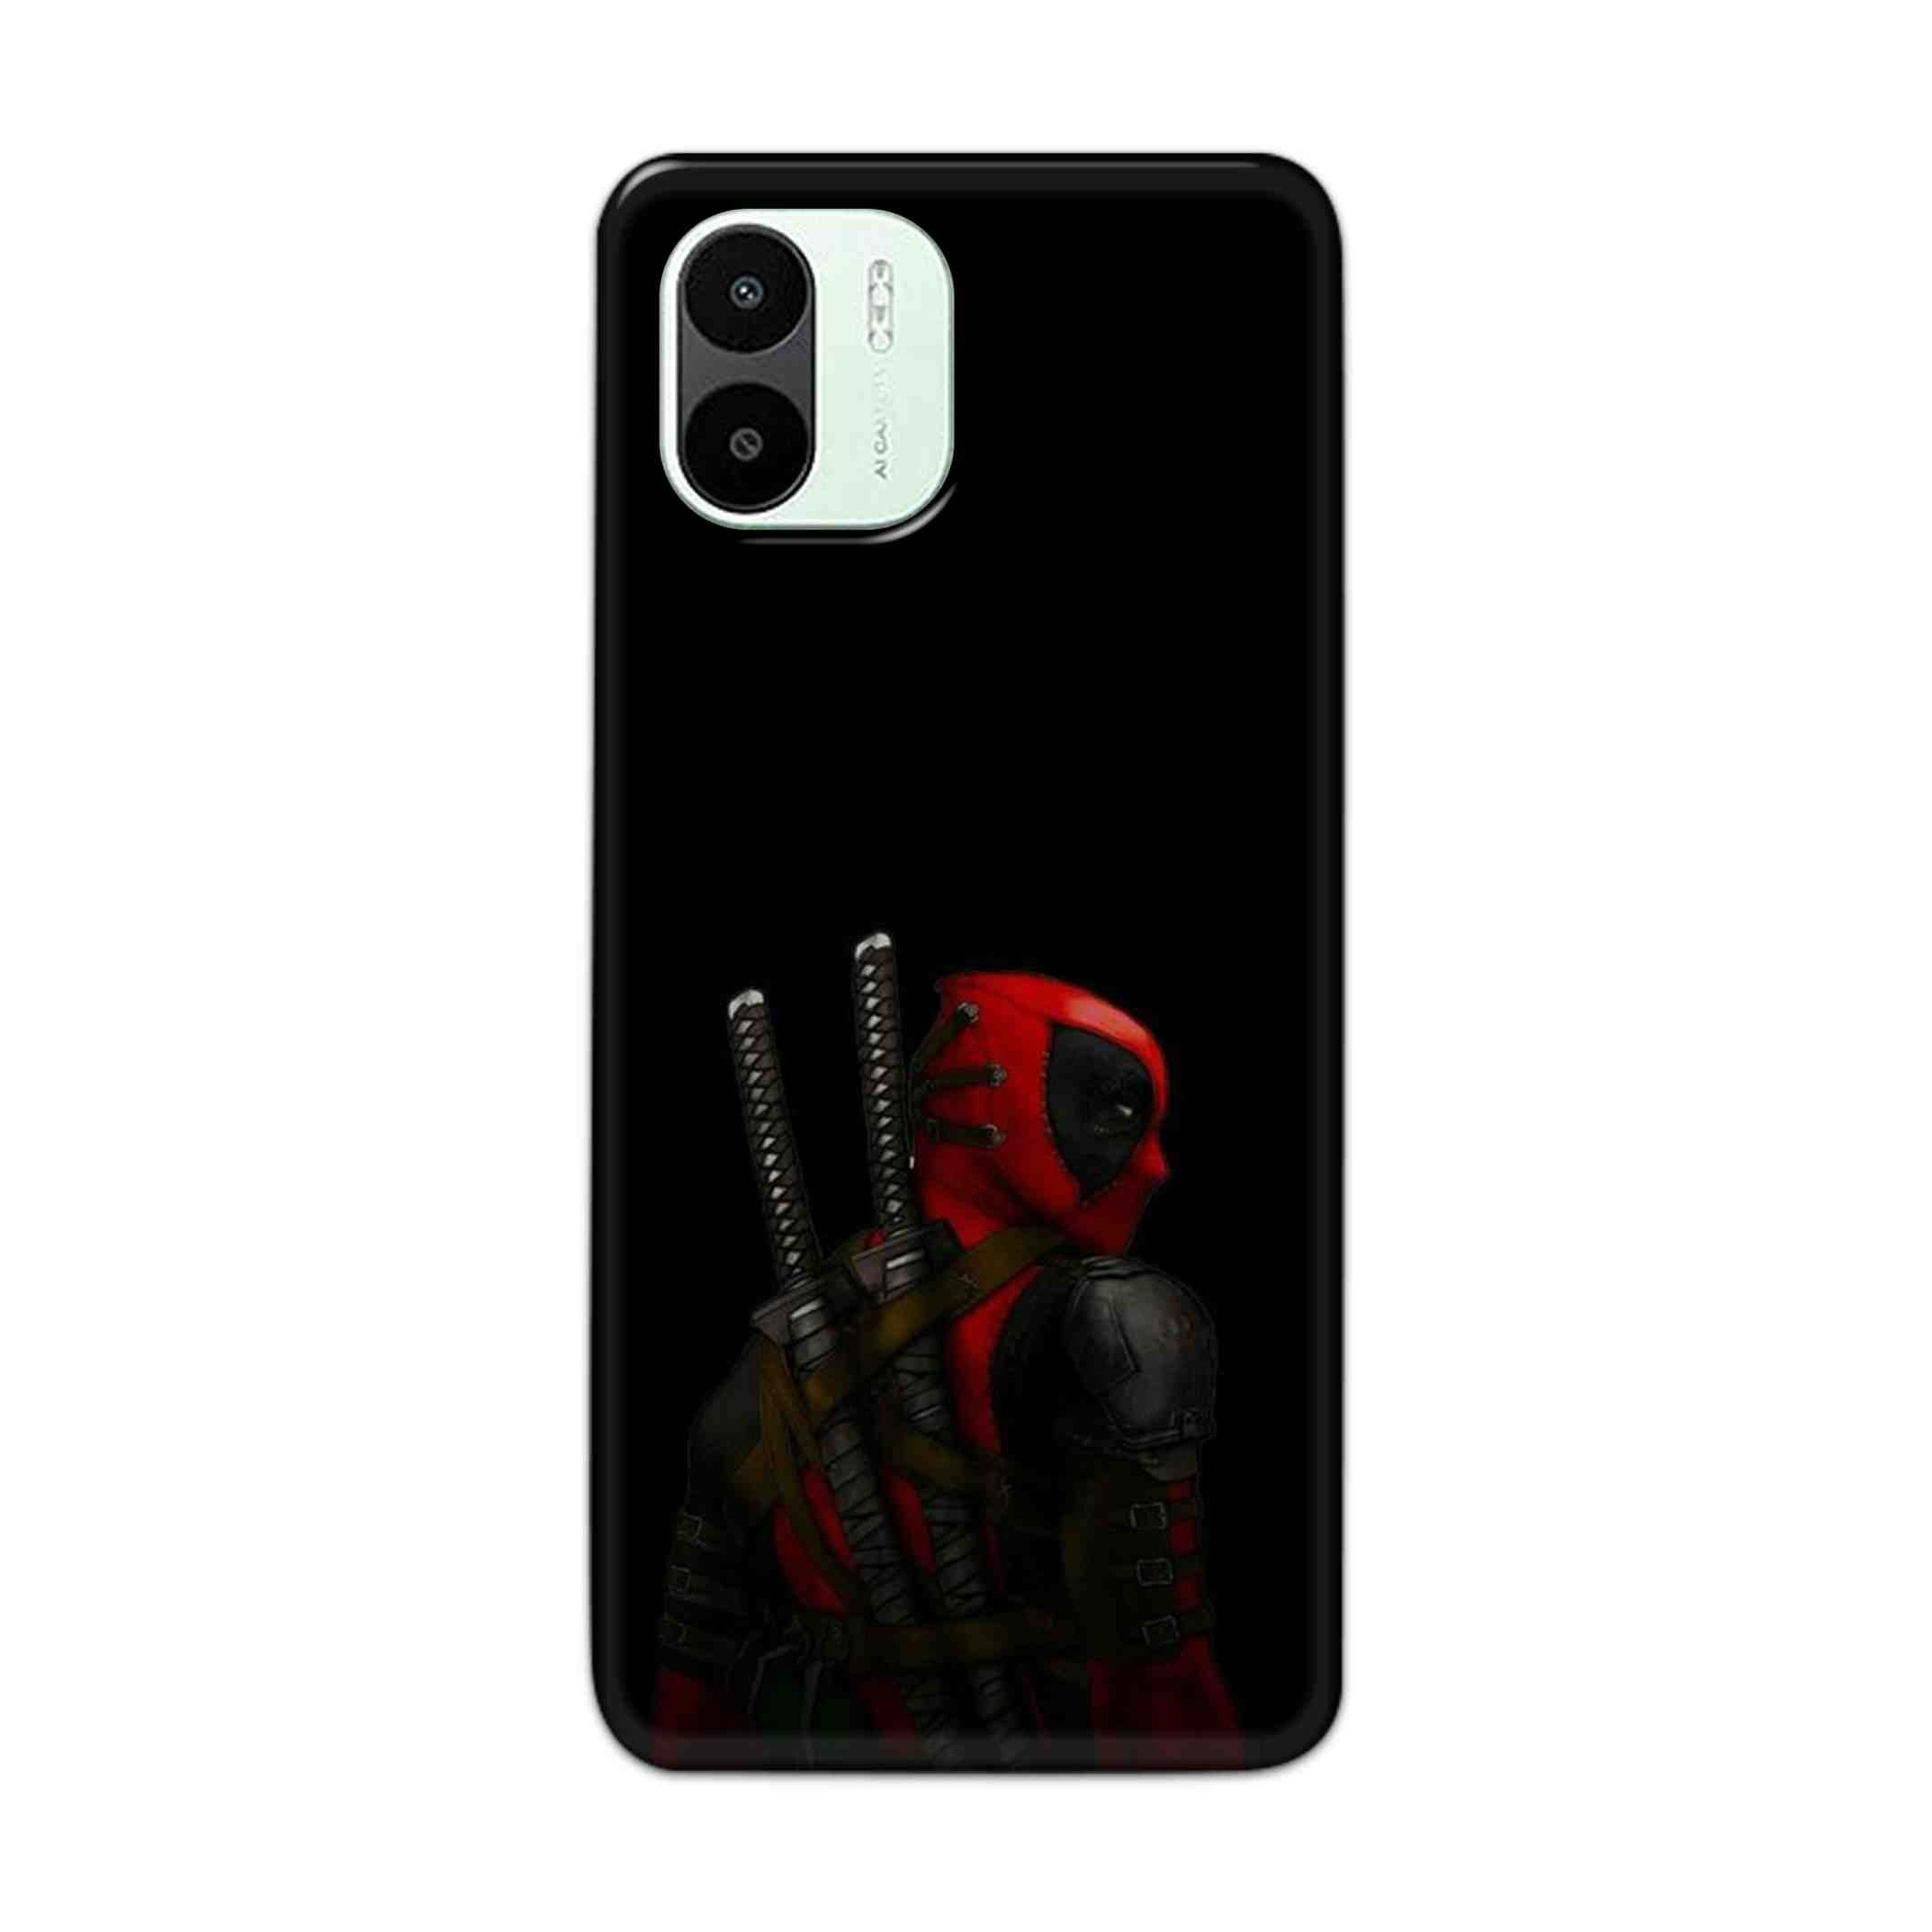 Buy Deadpool Hard Back Mobile Phone Case Cover For Xiaomi Redmi A1 5G Online